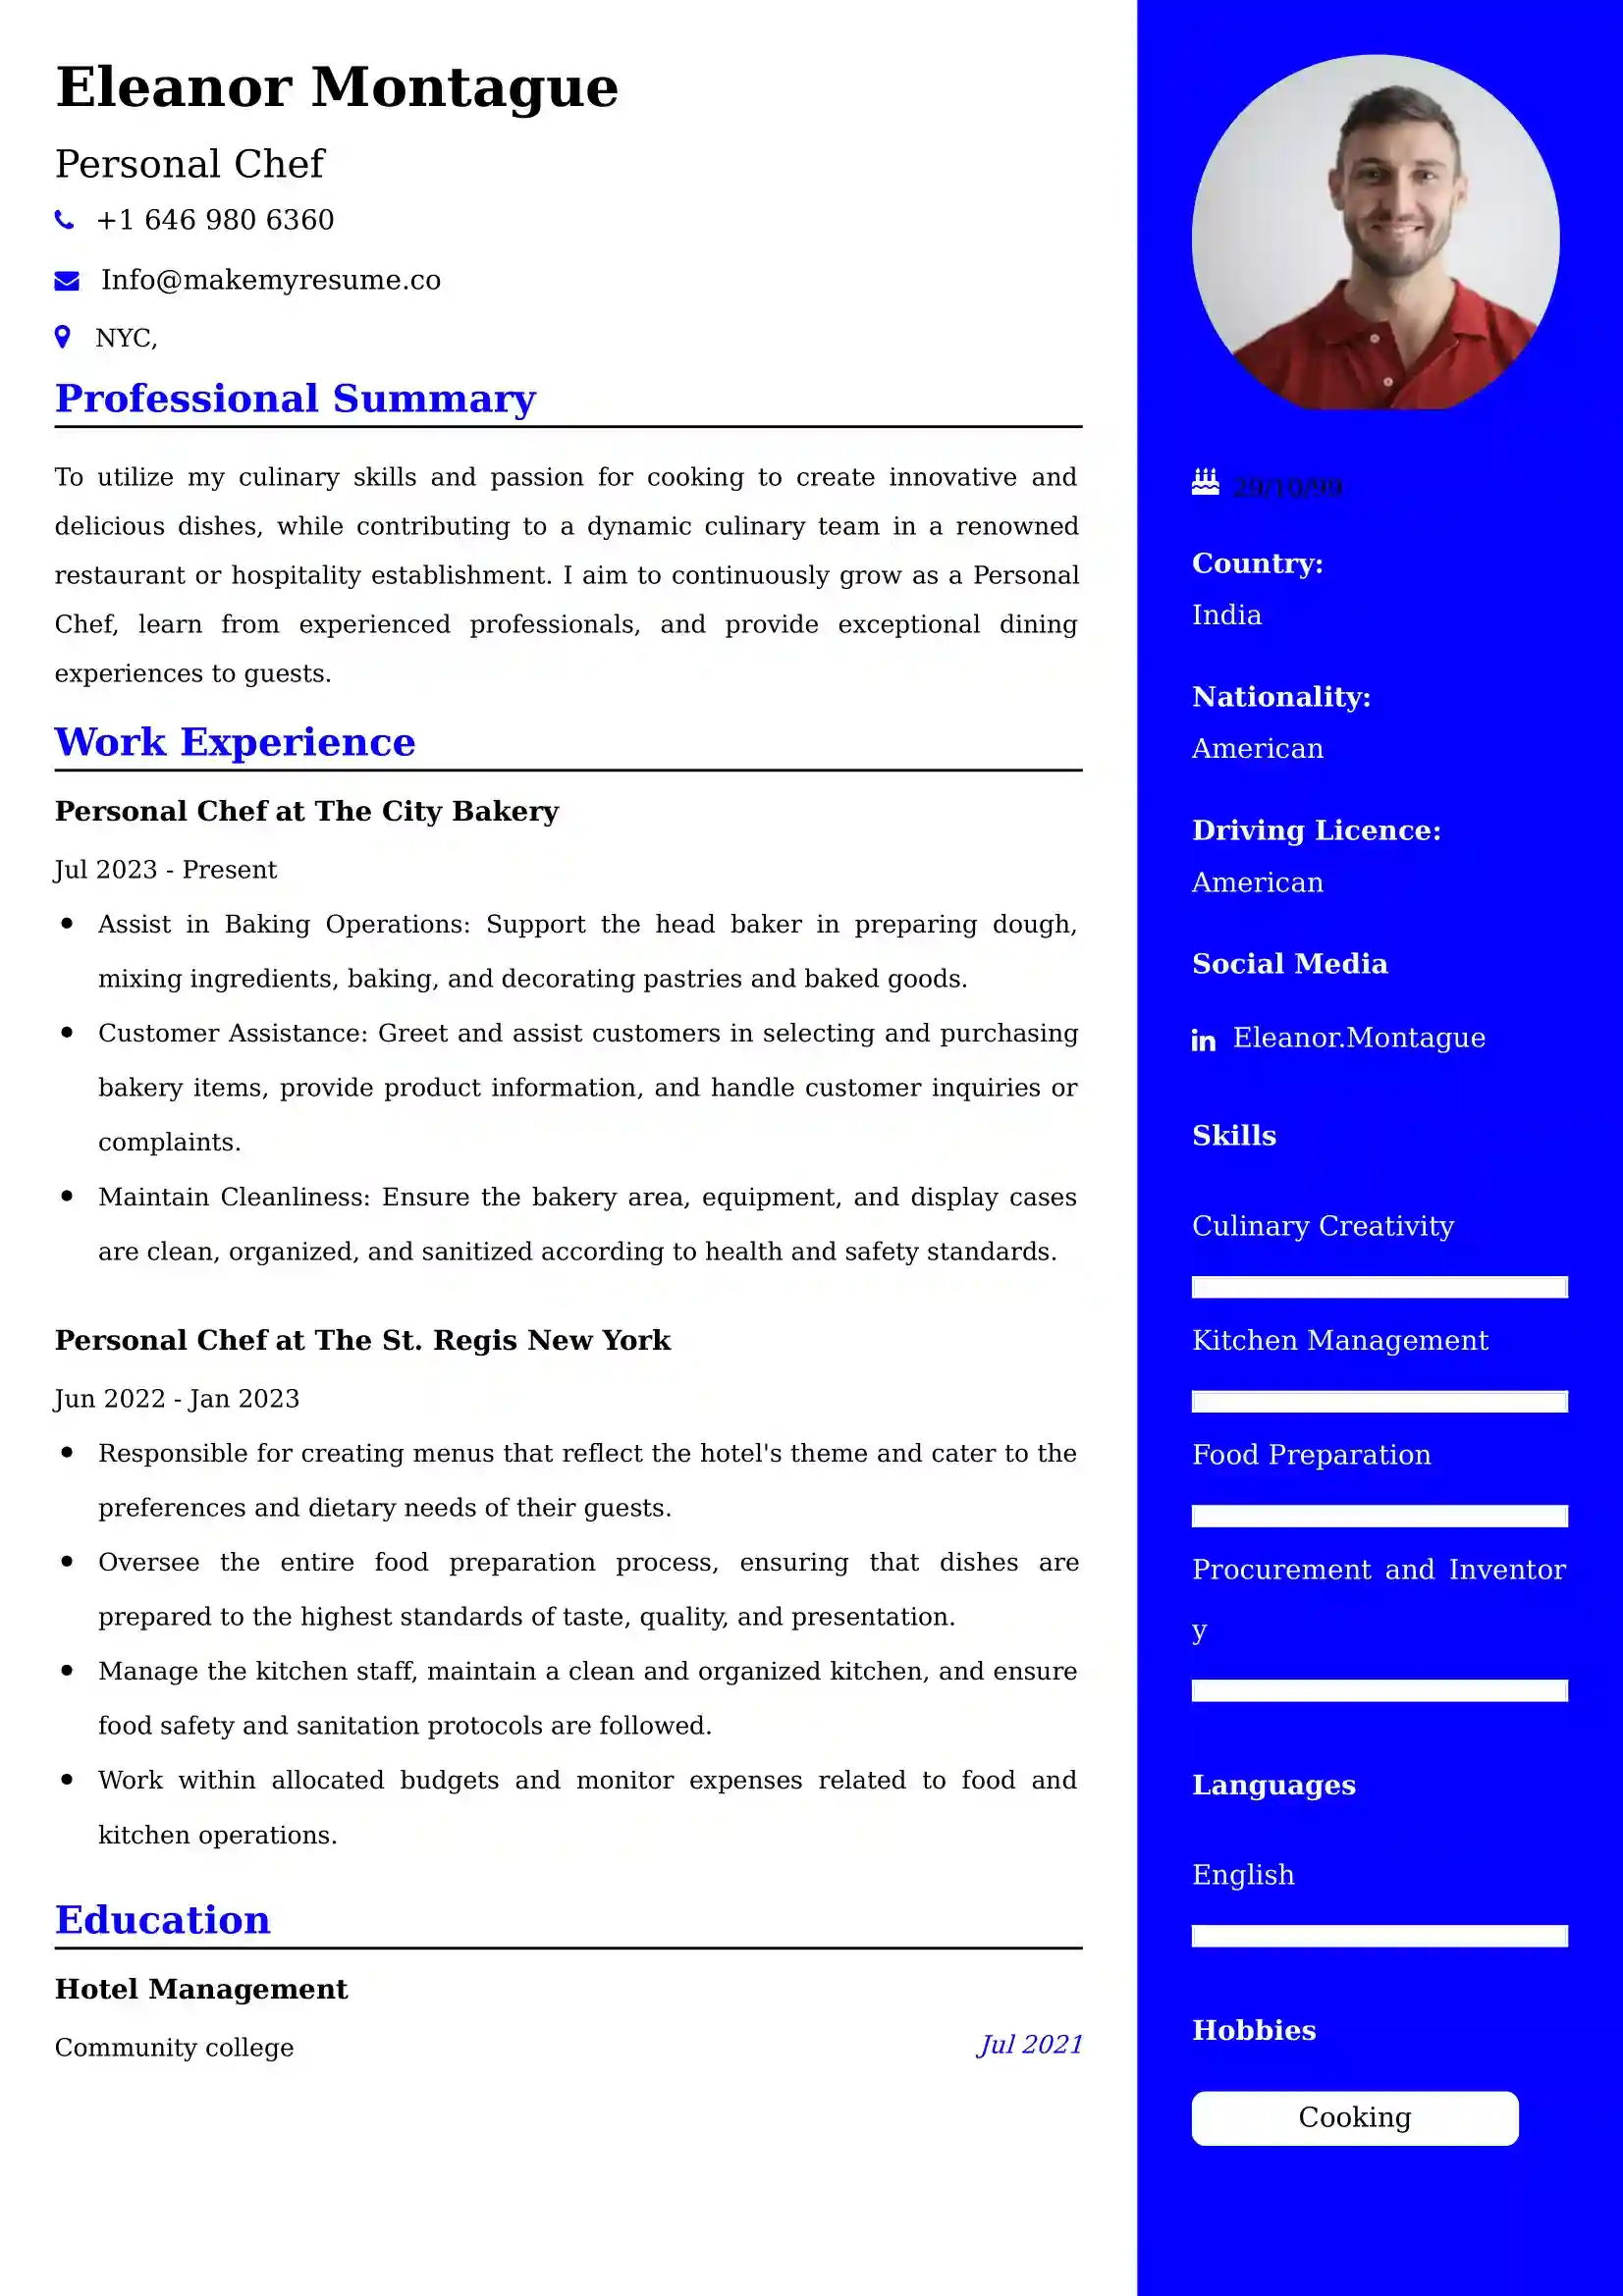 Personal Chef Resume Examples - UAE Format and Tips.